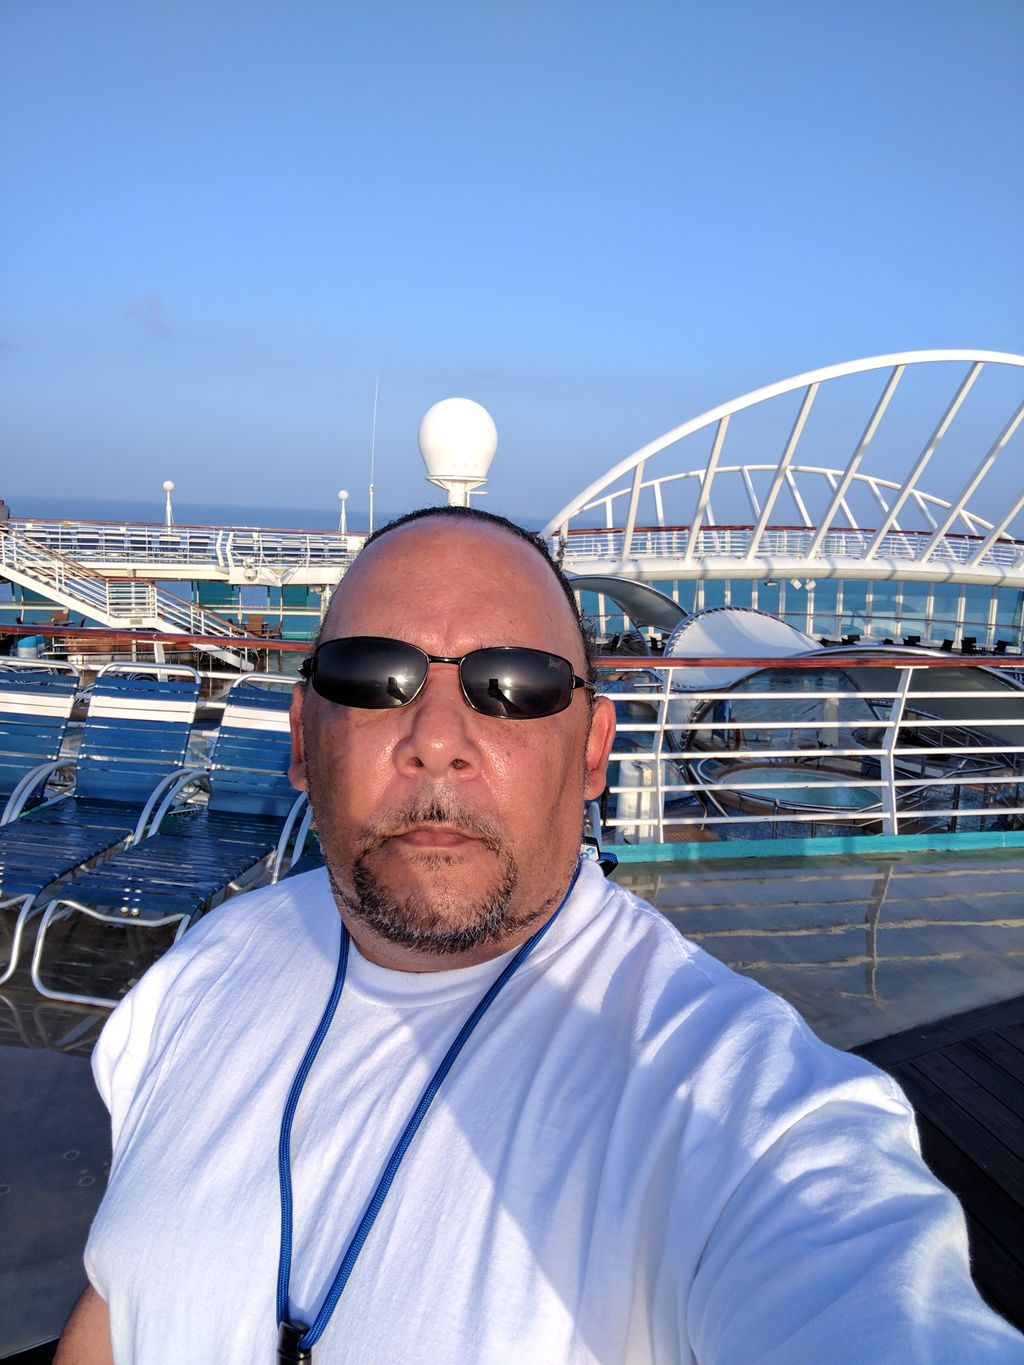 Uploaded by James Ventress from Grown & Sexy Memorial Day Vibe Cruise on Wednesday, August 03, 2022